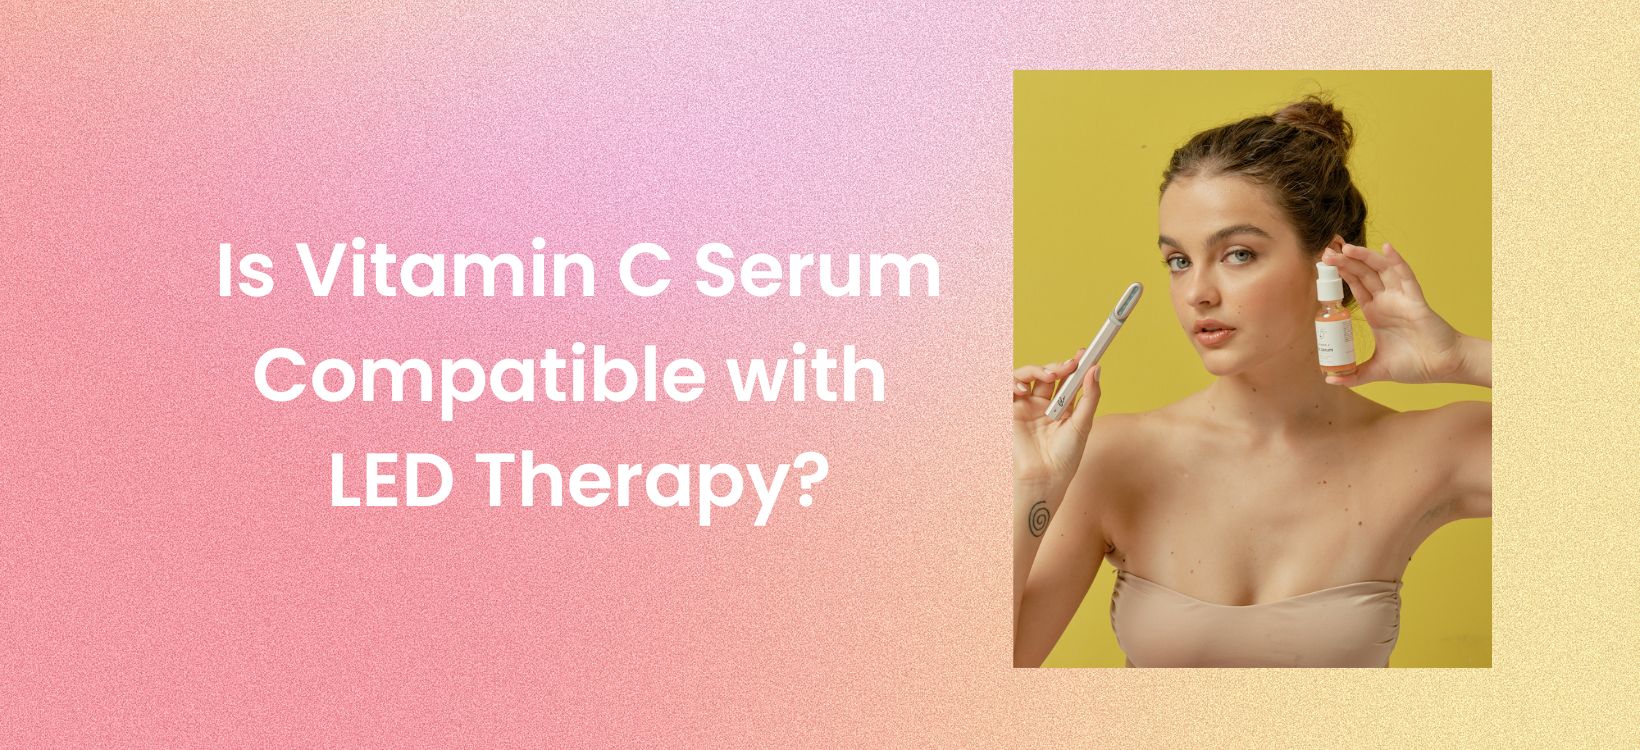 Is Vitamin C Serum Compatible with LED Therapy?